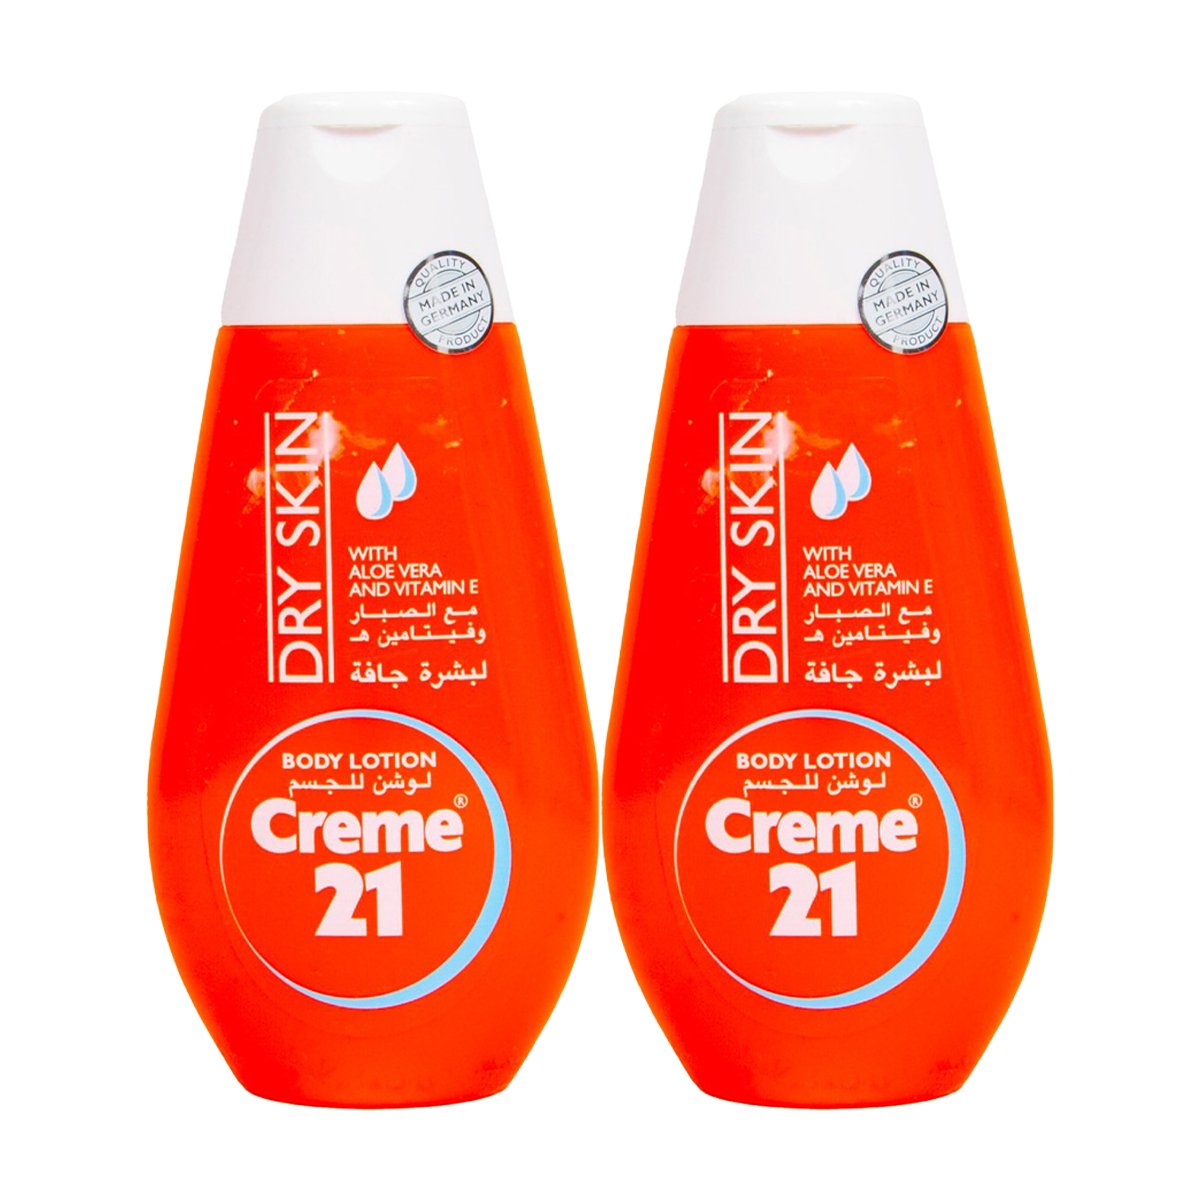 Creme 21 Body Lotion For Dry Skin Value Pack 2 x 250 ml